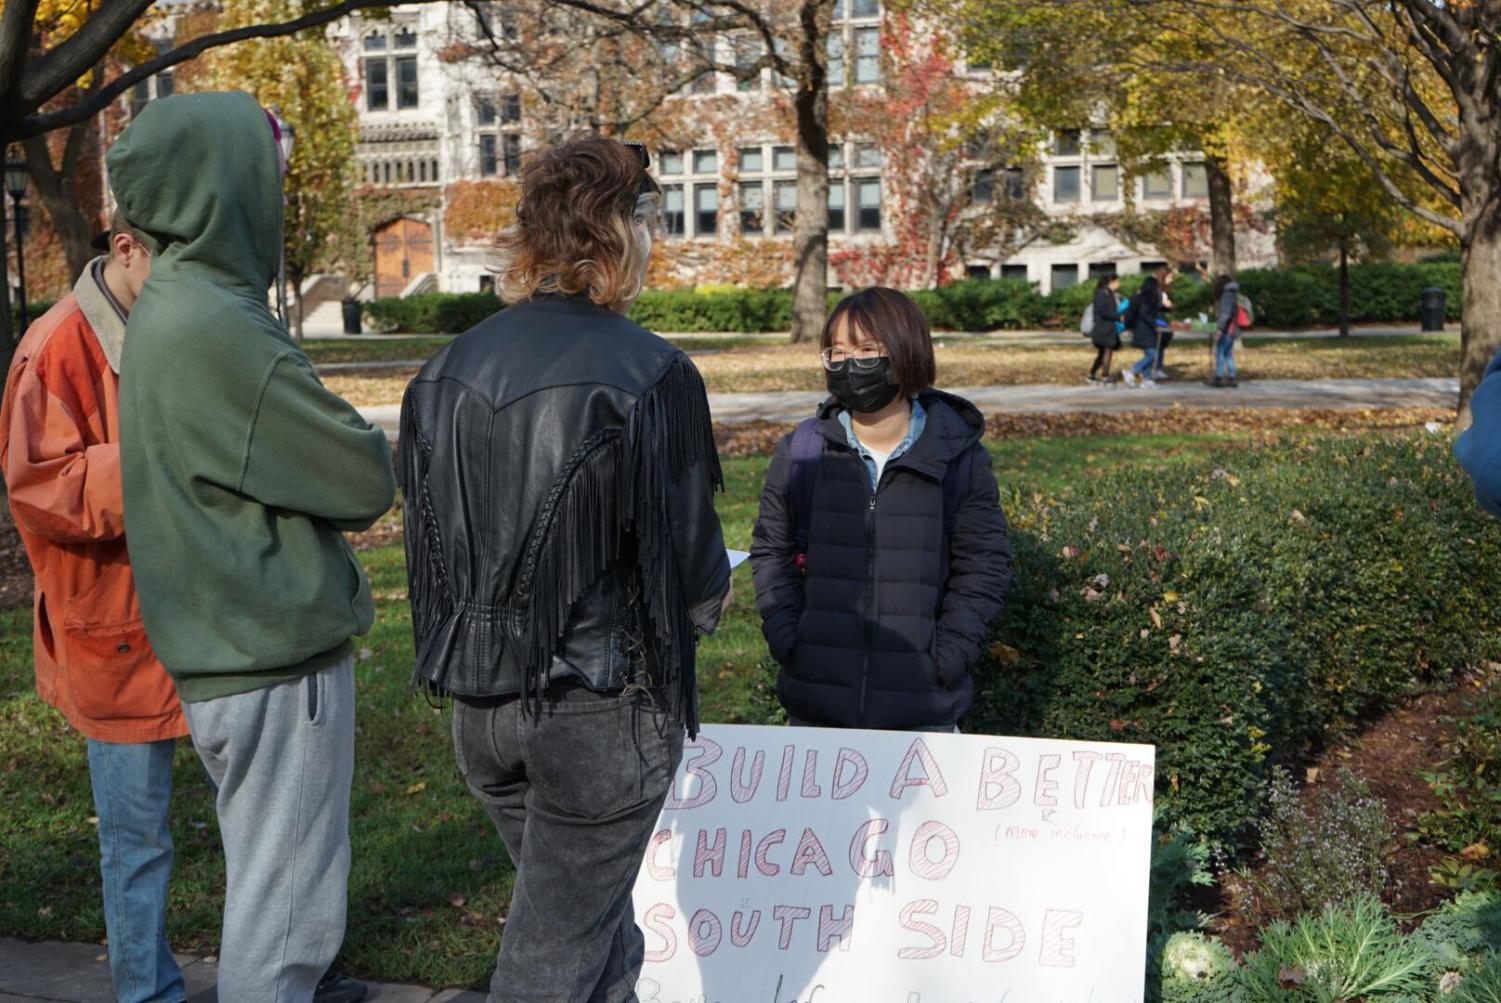 Hang Wu, a Ph.D. student in the Department of Cinema and Media Studies, explained her signs to passersby.